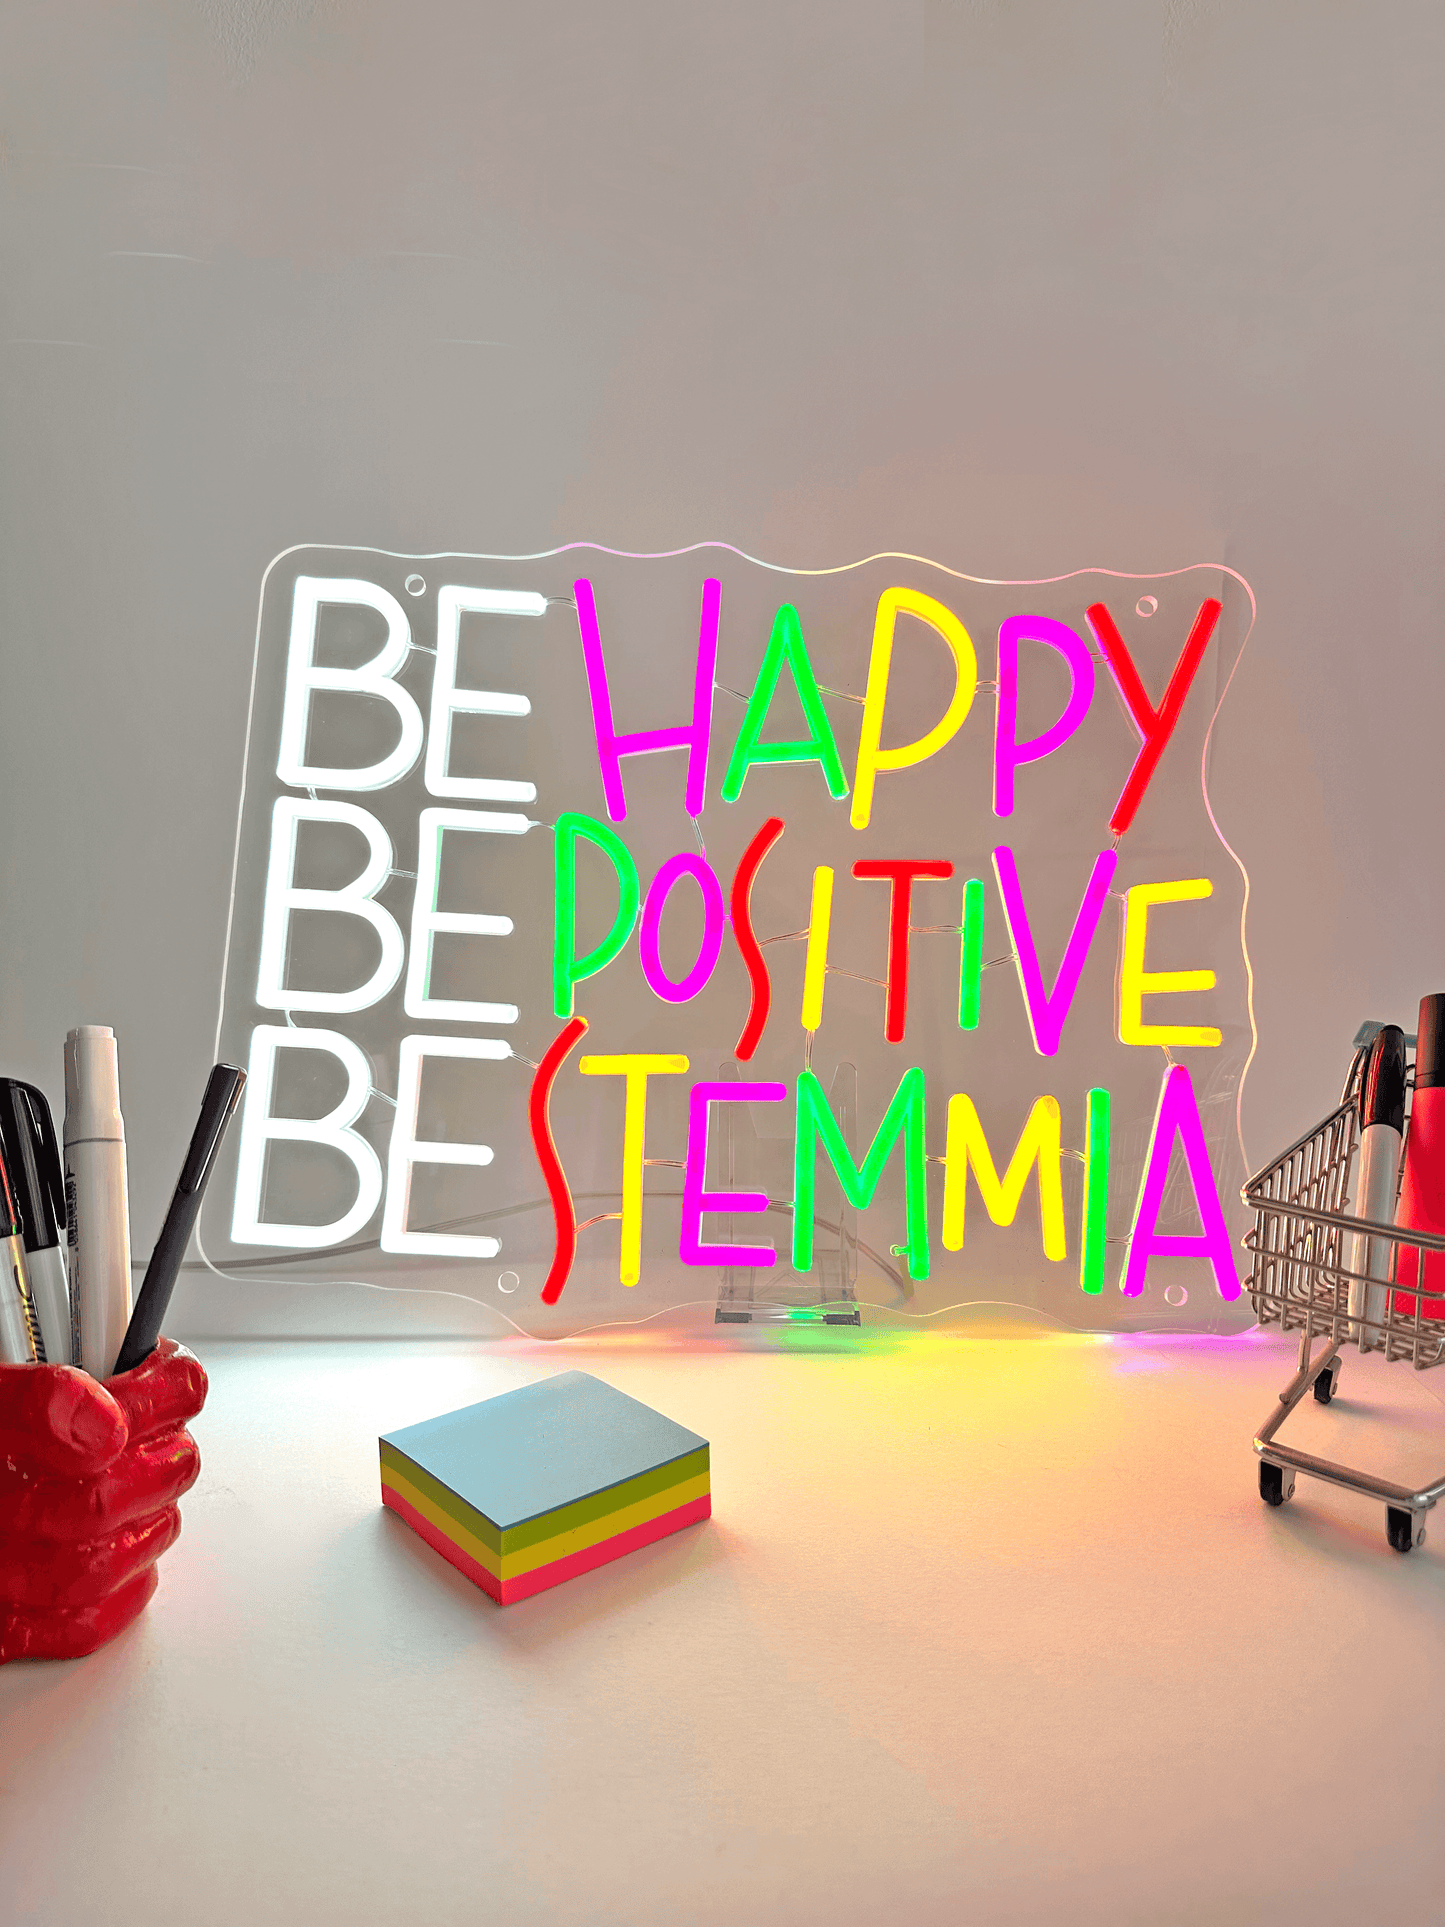 BE HAPPY BE POSITIVE BE STEMMIA